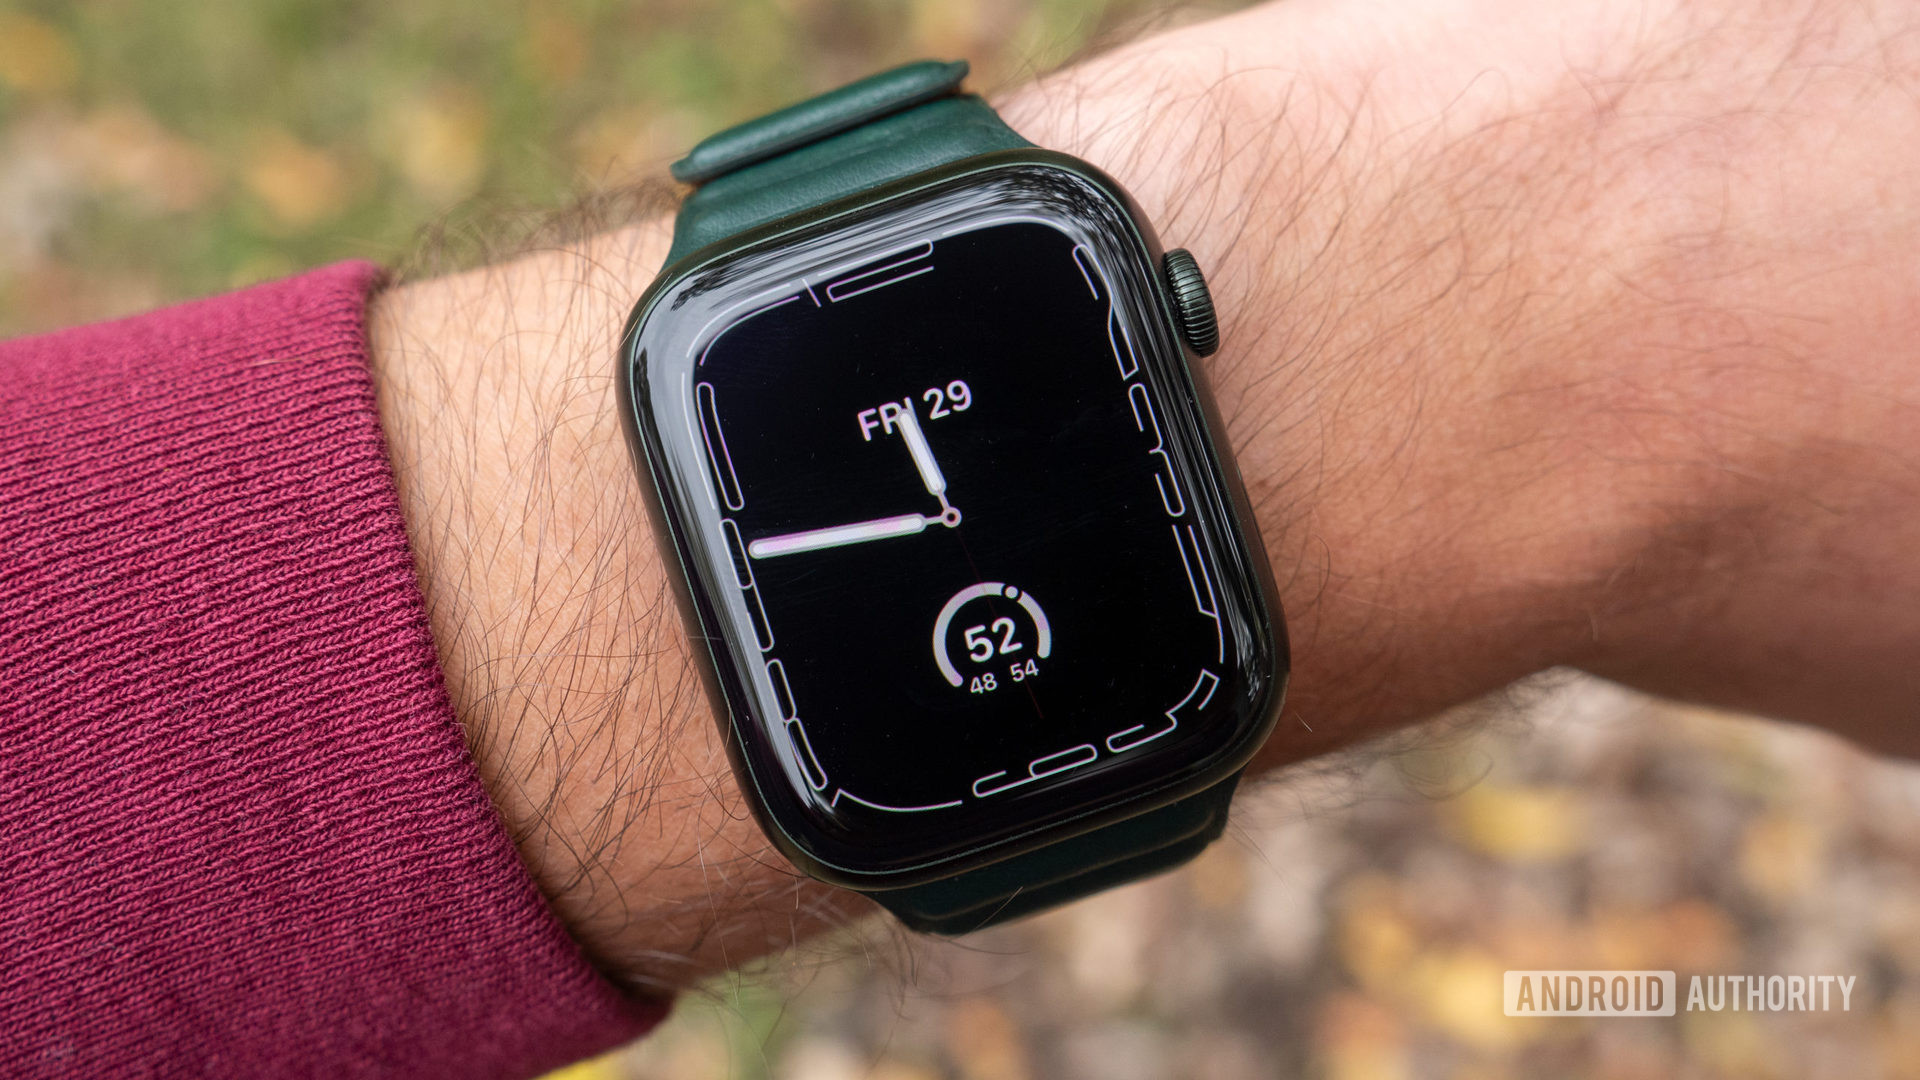 An image of the Apple Watch Series 7 on a wrist showing the Contour watch face always-on display